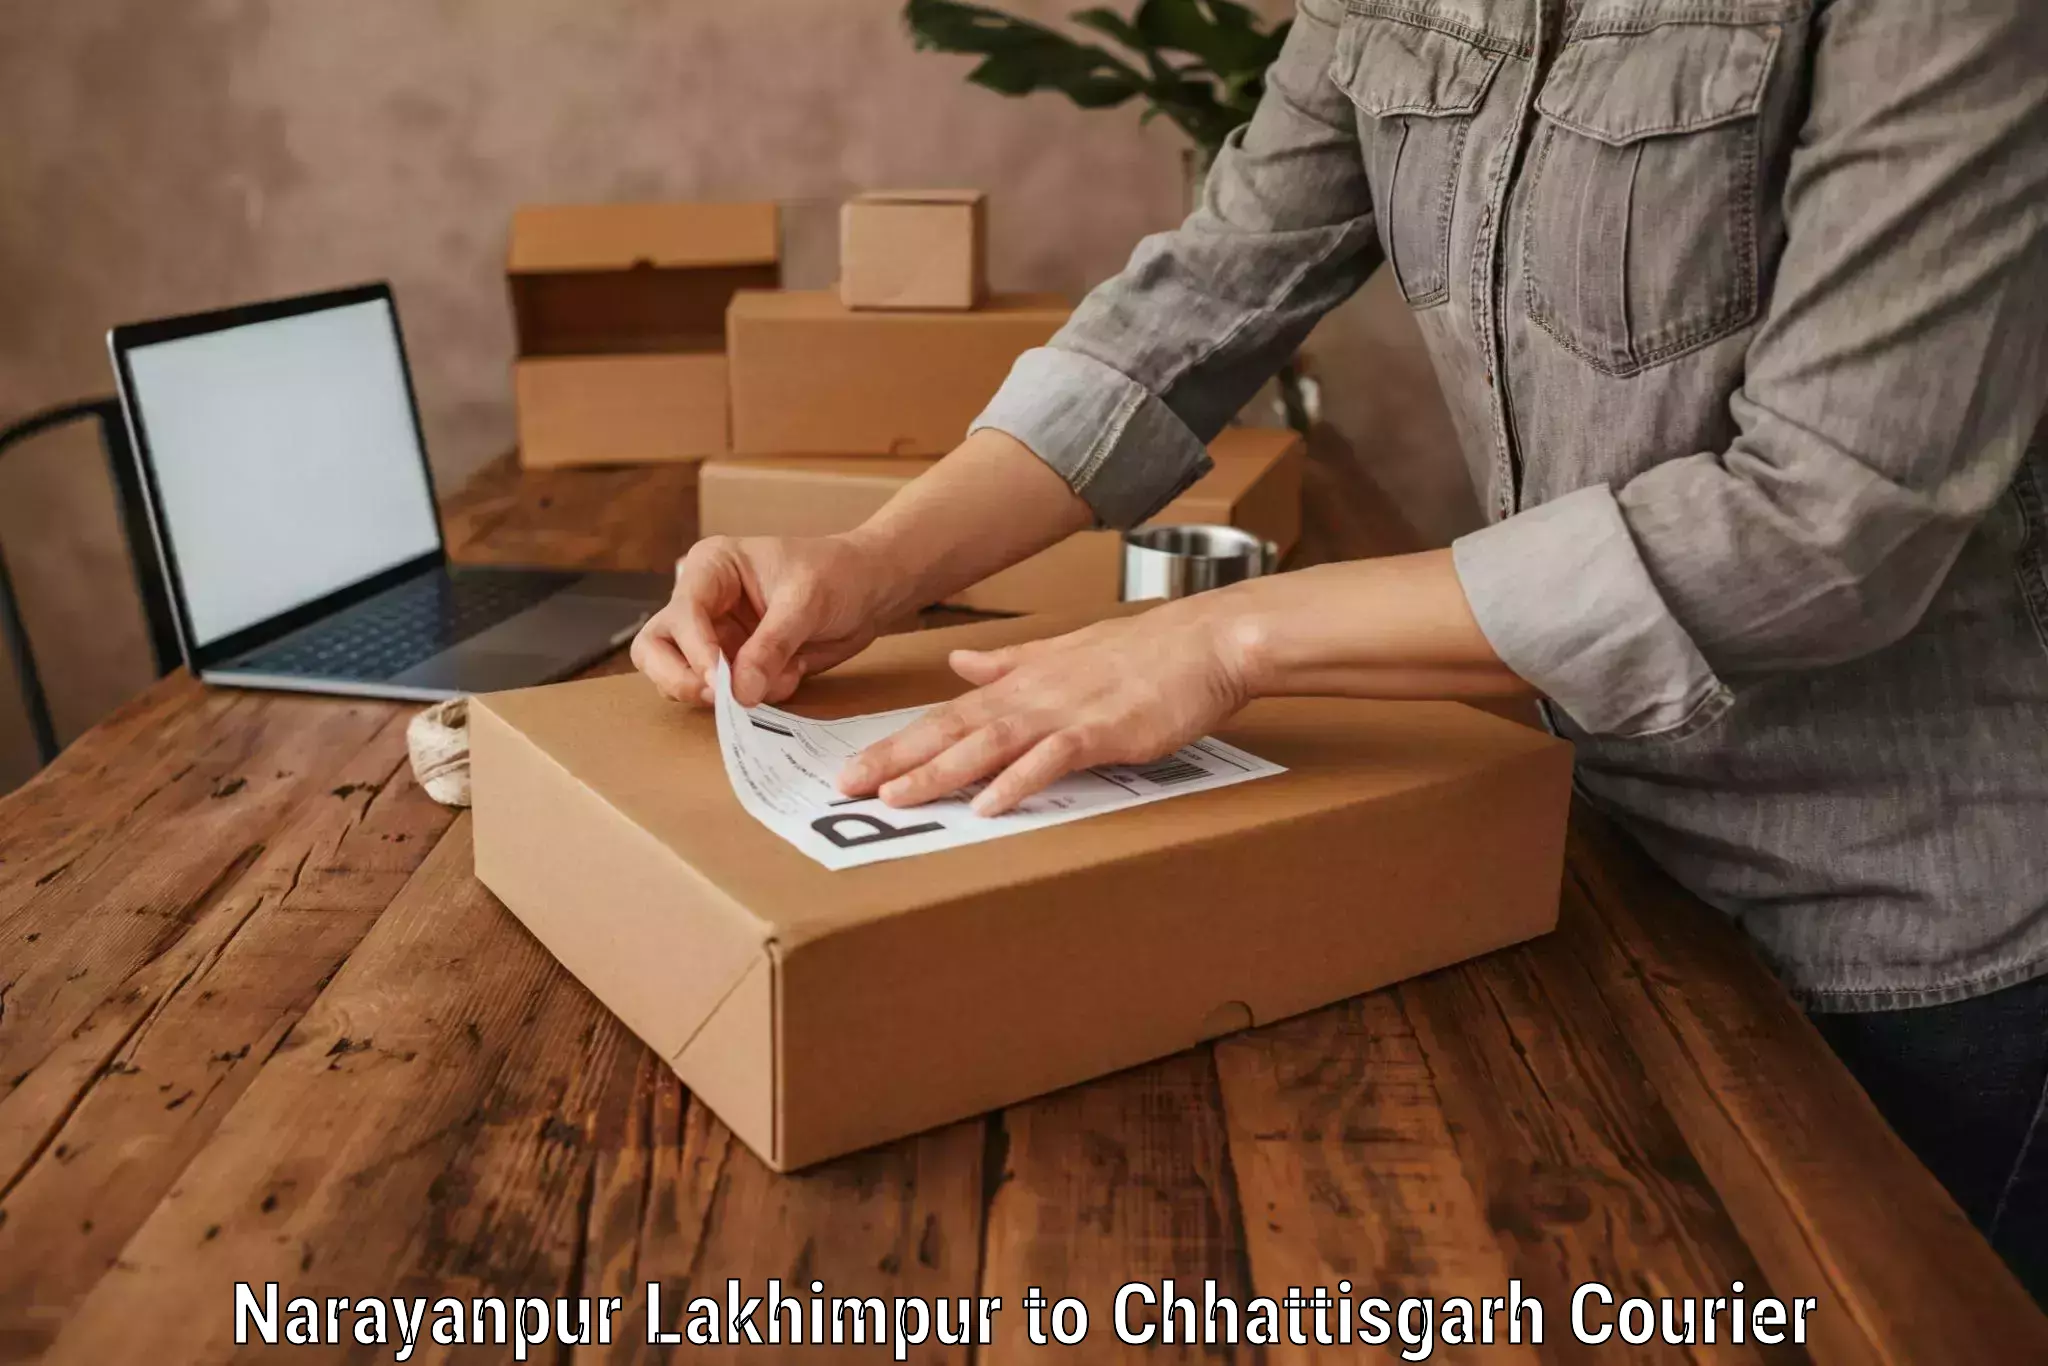 Baggage delivery scheduling Narayanpur Lakhimpur to Chhattisgarh